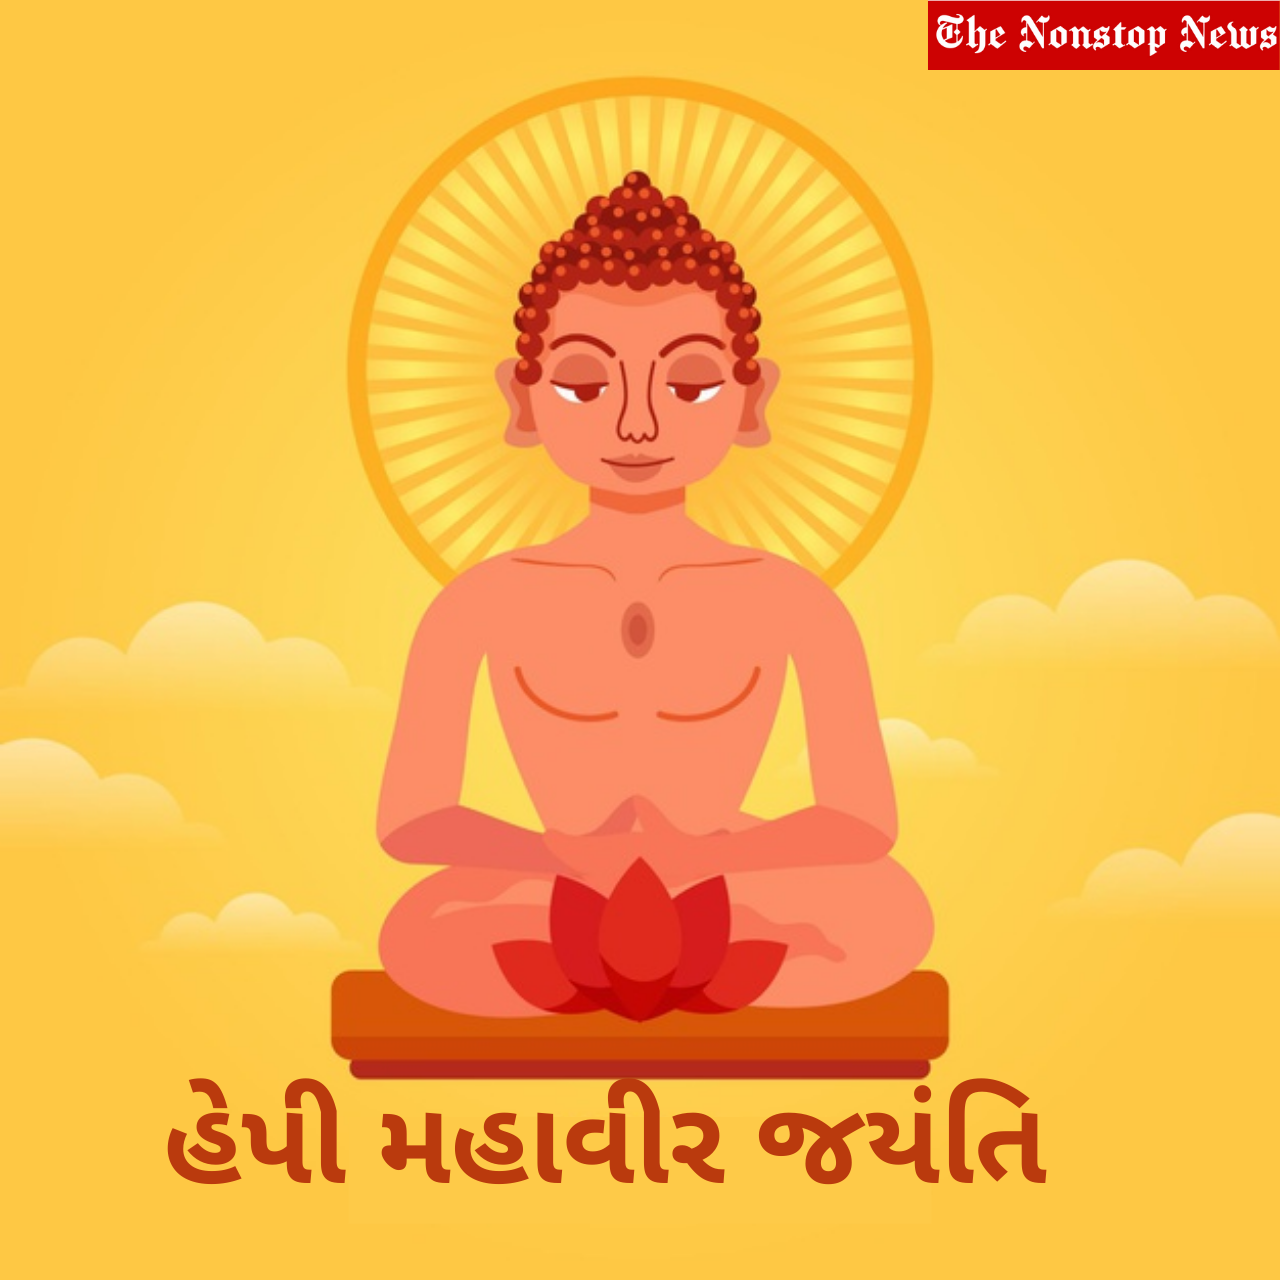 Happy Mahavir Jayanti 2021 Wishes in Gujarati, Messages, Greetings, Quotes, and Images to Share